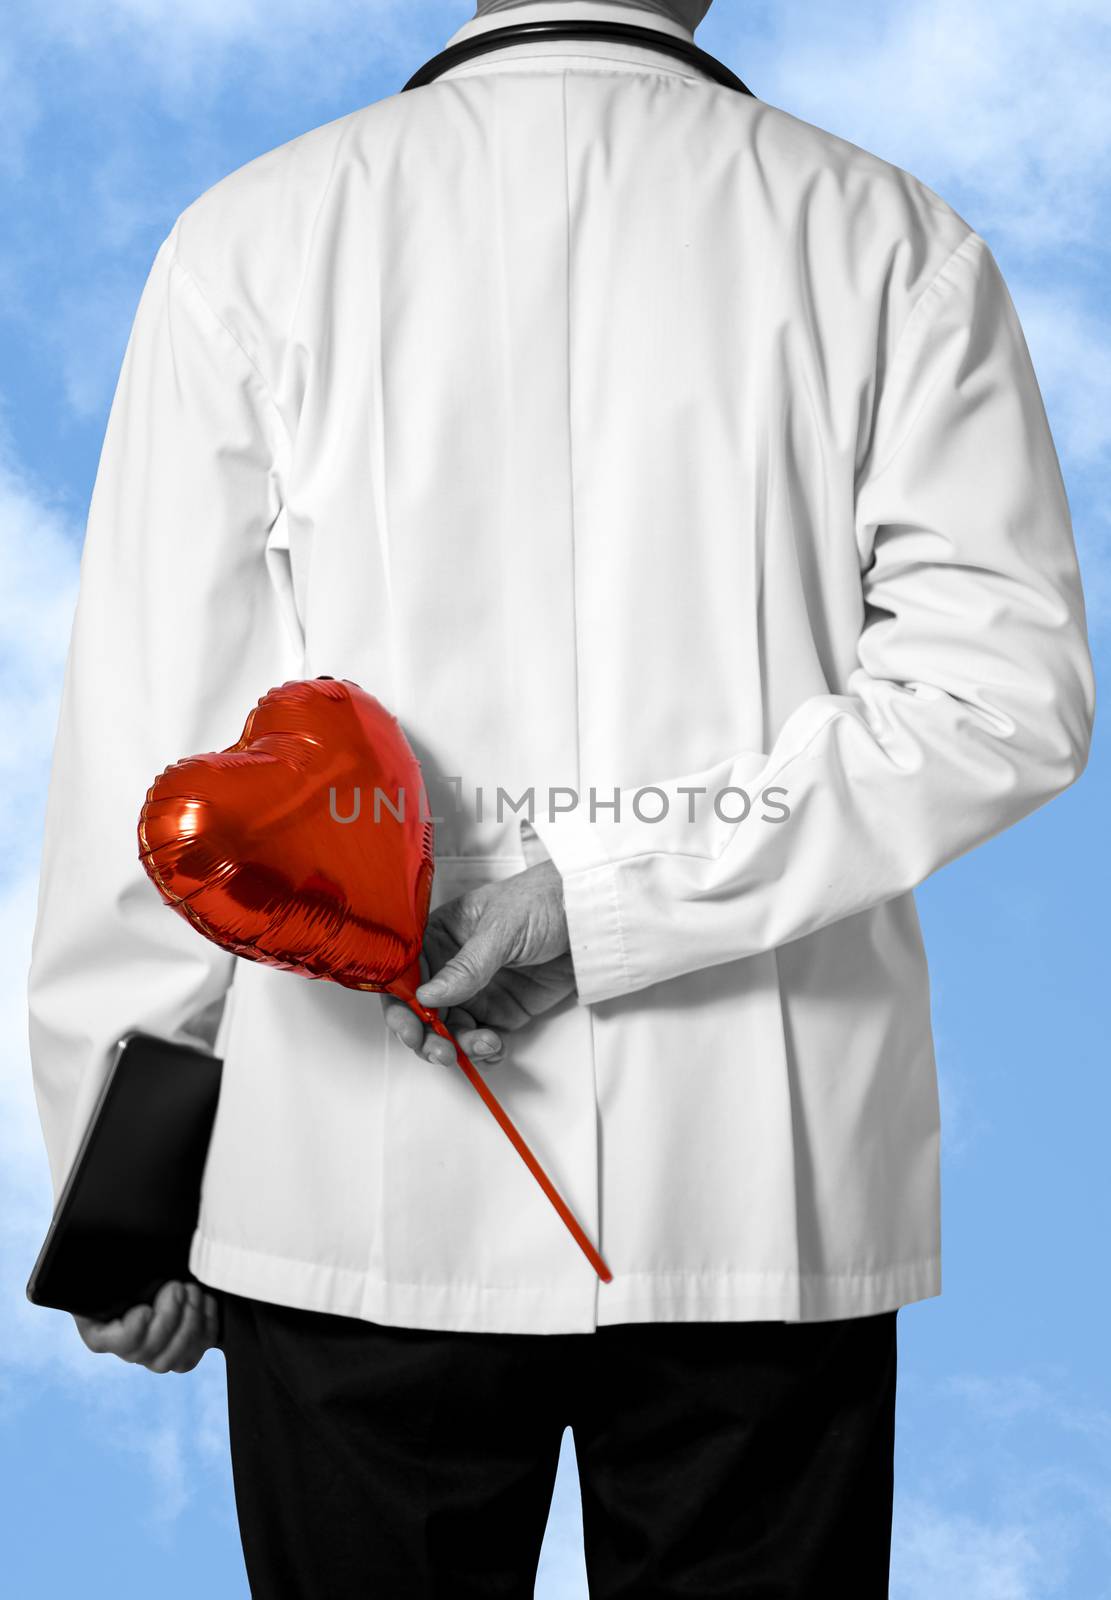 A male doctor in white coat holding a red balloon behind his back. Blue sky with white clouds background. Selective focus on red baloon with limited color. Doctor and caring concept.